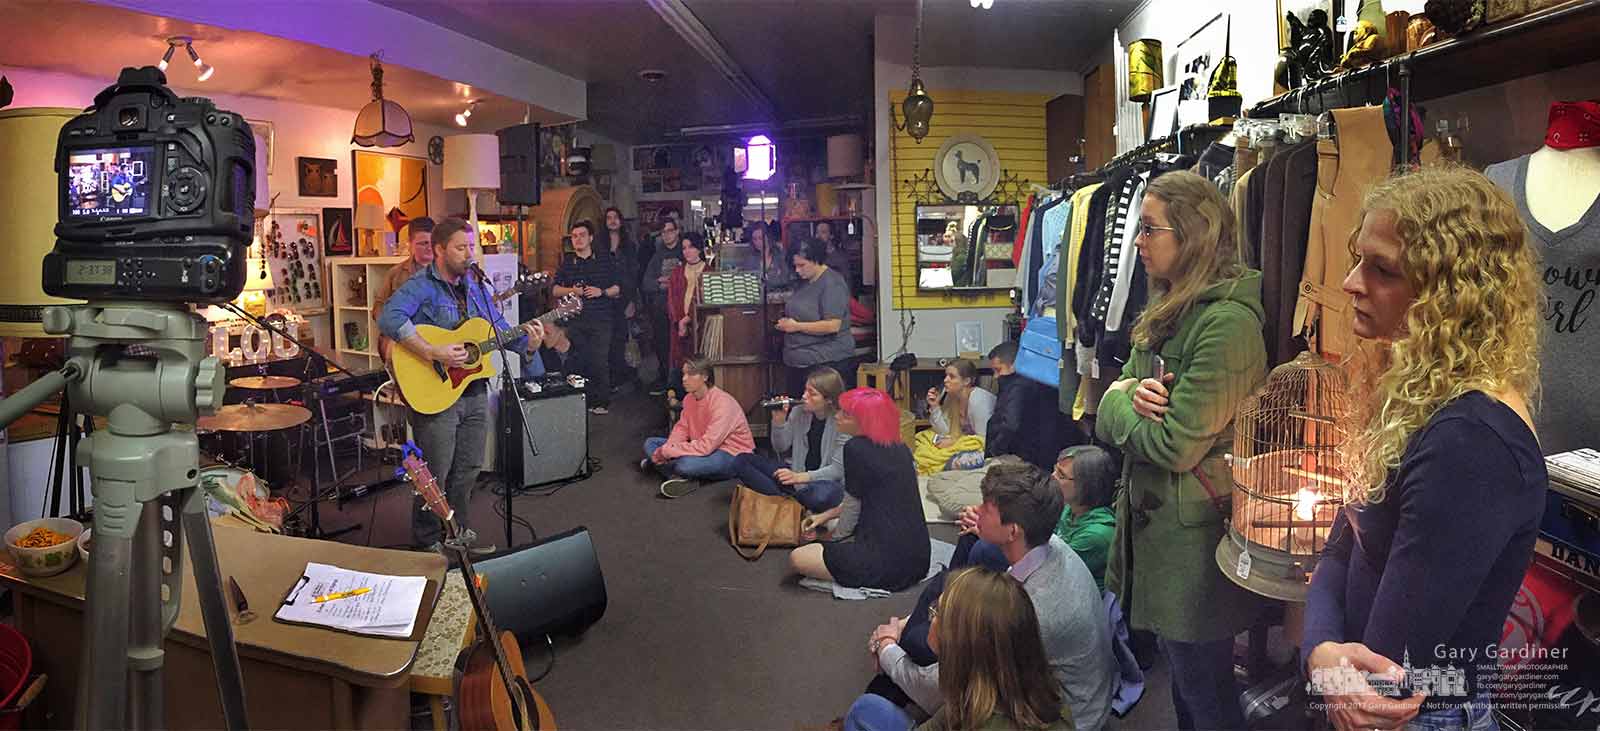 Sean Marshall with Near Miss performs as part of the Sofar Sounds small venue concerts in Cinda Lou Shop in Uptown Westerville. My Final Photo for March 26, 2017.